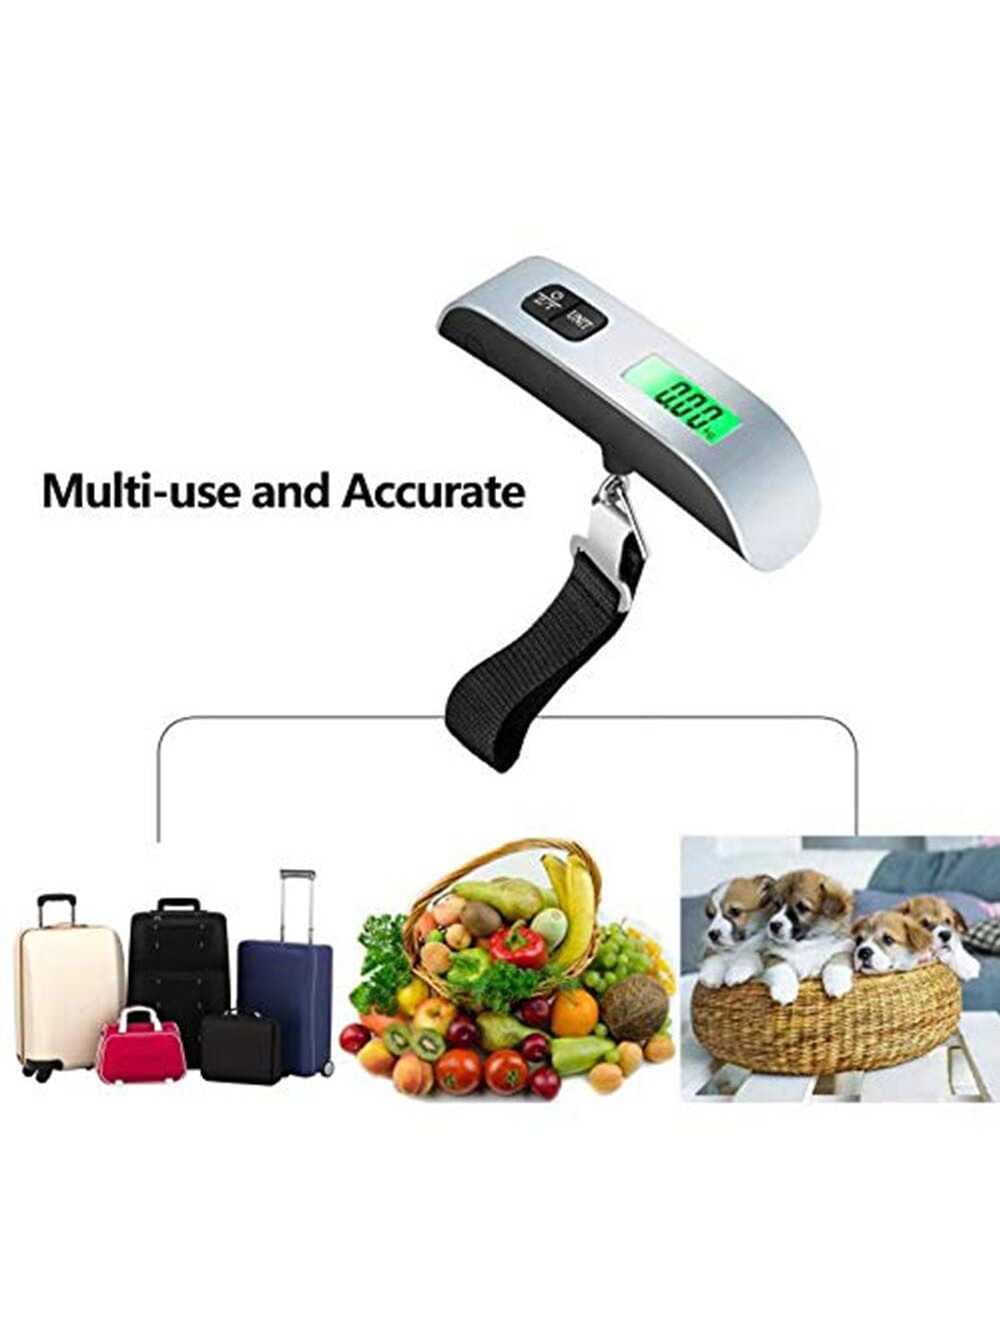 1pcs Portable Scale Digital LCD Display 110lb/50kg Electronic Luggage Hanging Suitcase Travel Weighs Baggage Bag Weight Balance-Silver-6